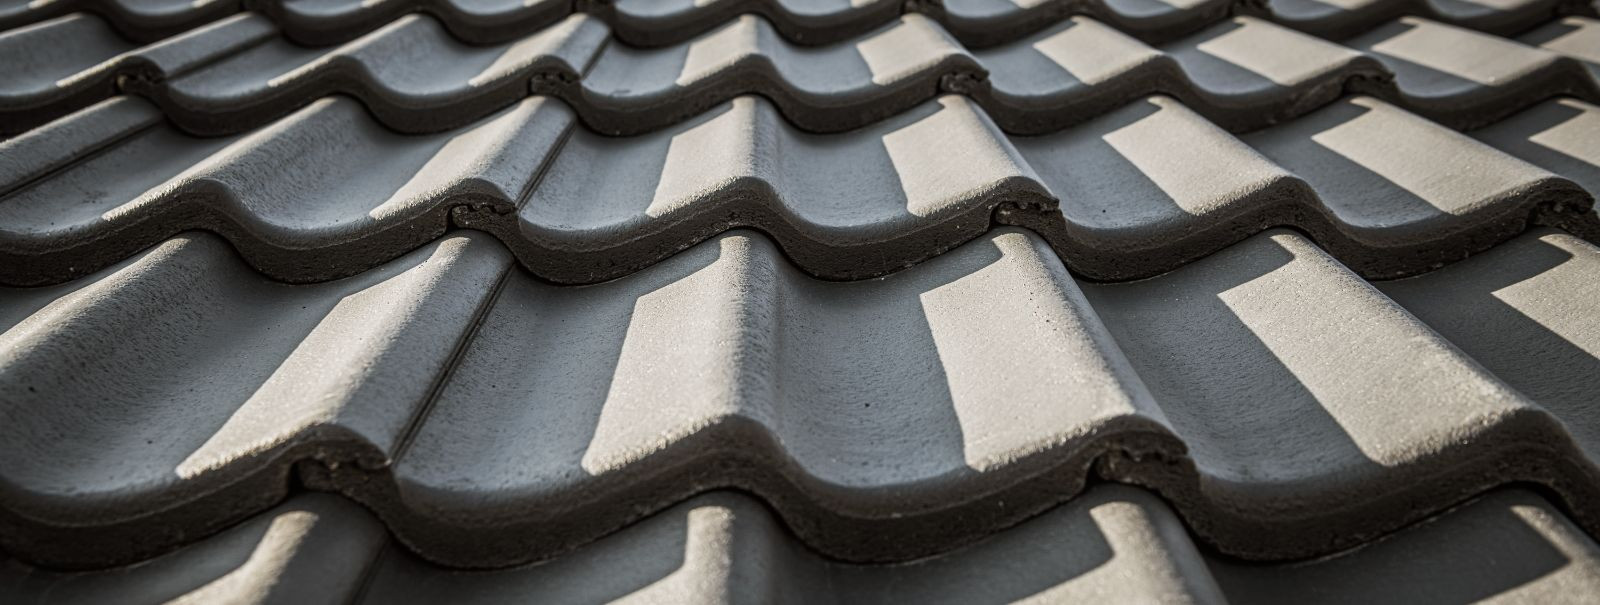 As a homeowner or property developer, understanding the condition of your roof is crucial for maintaining the safety, comfort, and value of your property. A fai